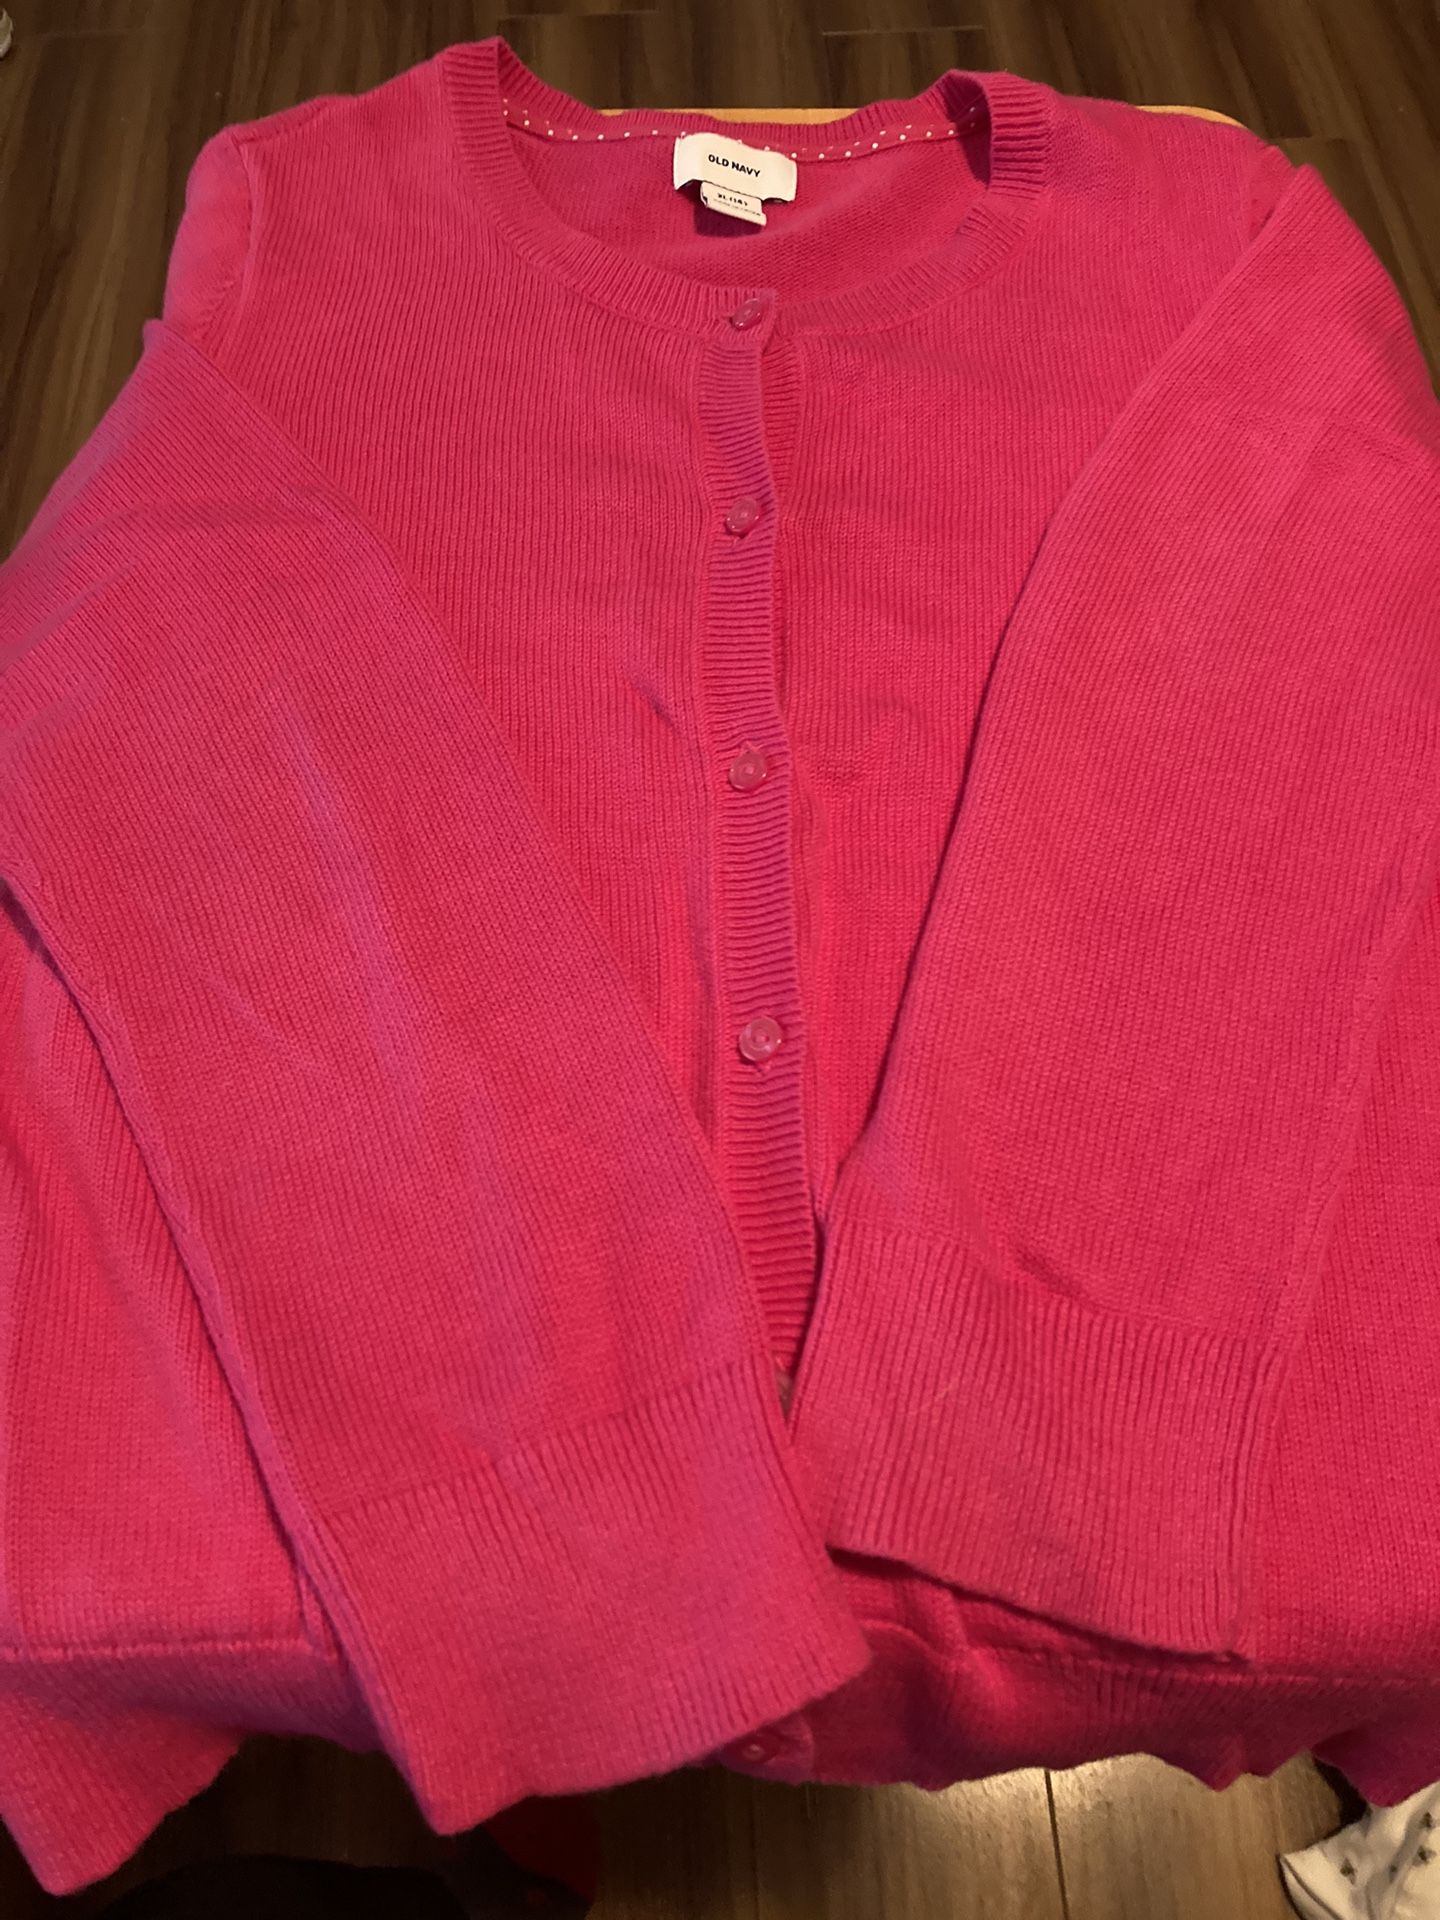 Old Navy Pink Knit Cardigan - Size Youth XL(14)